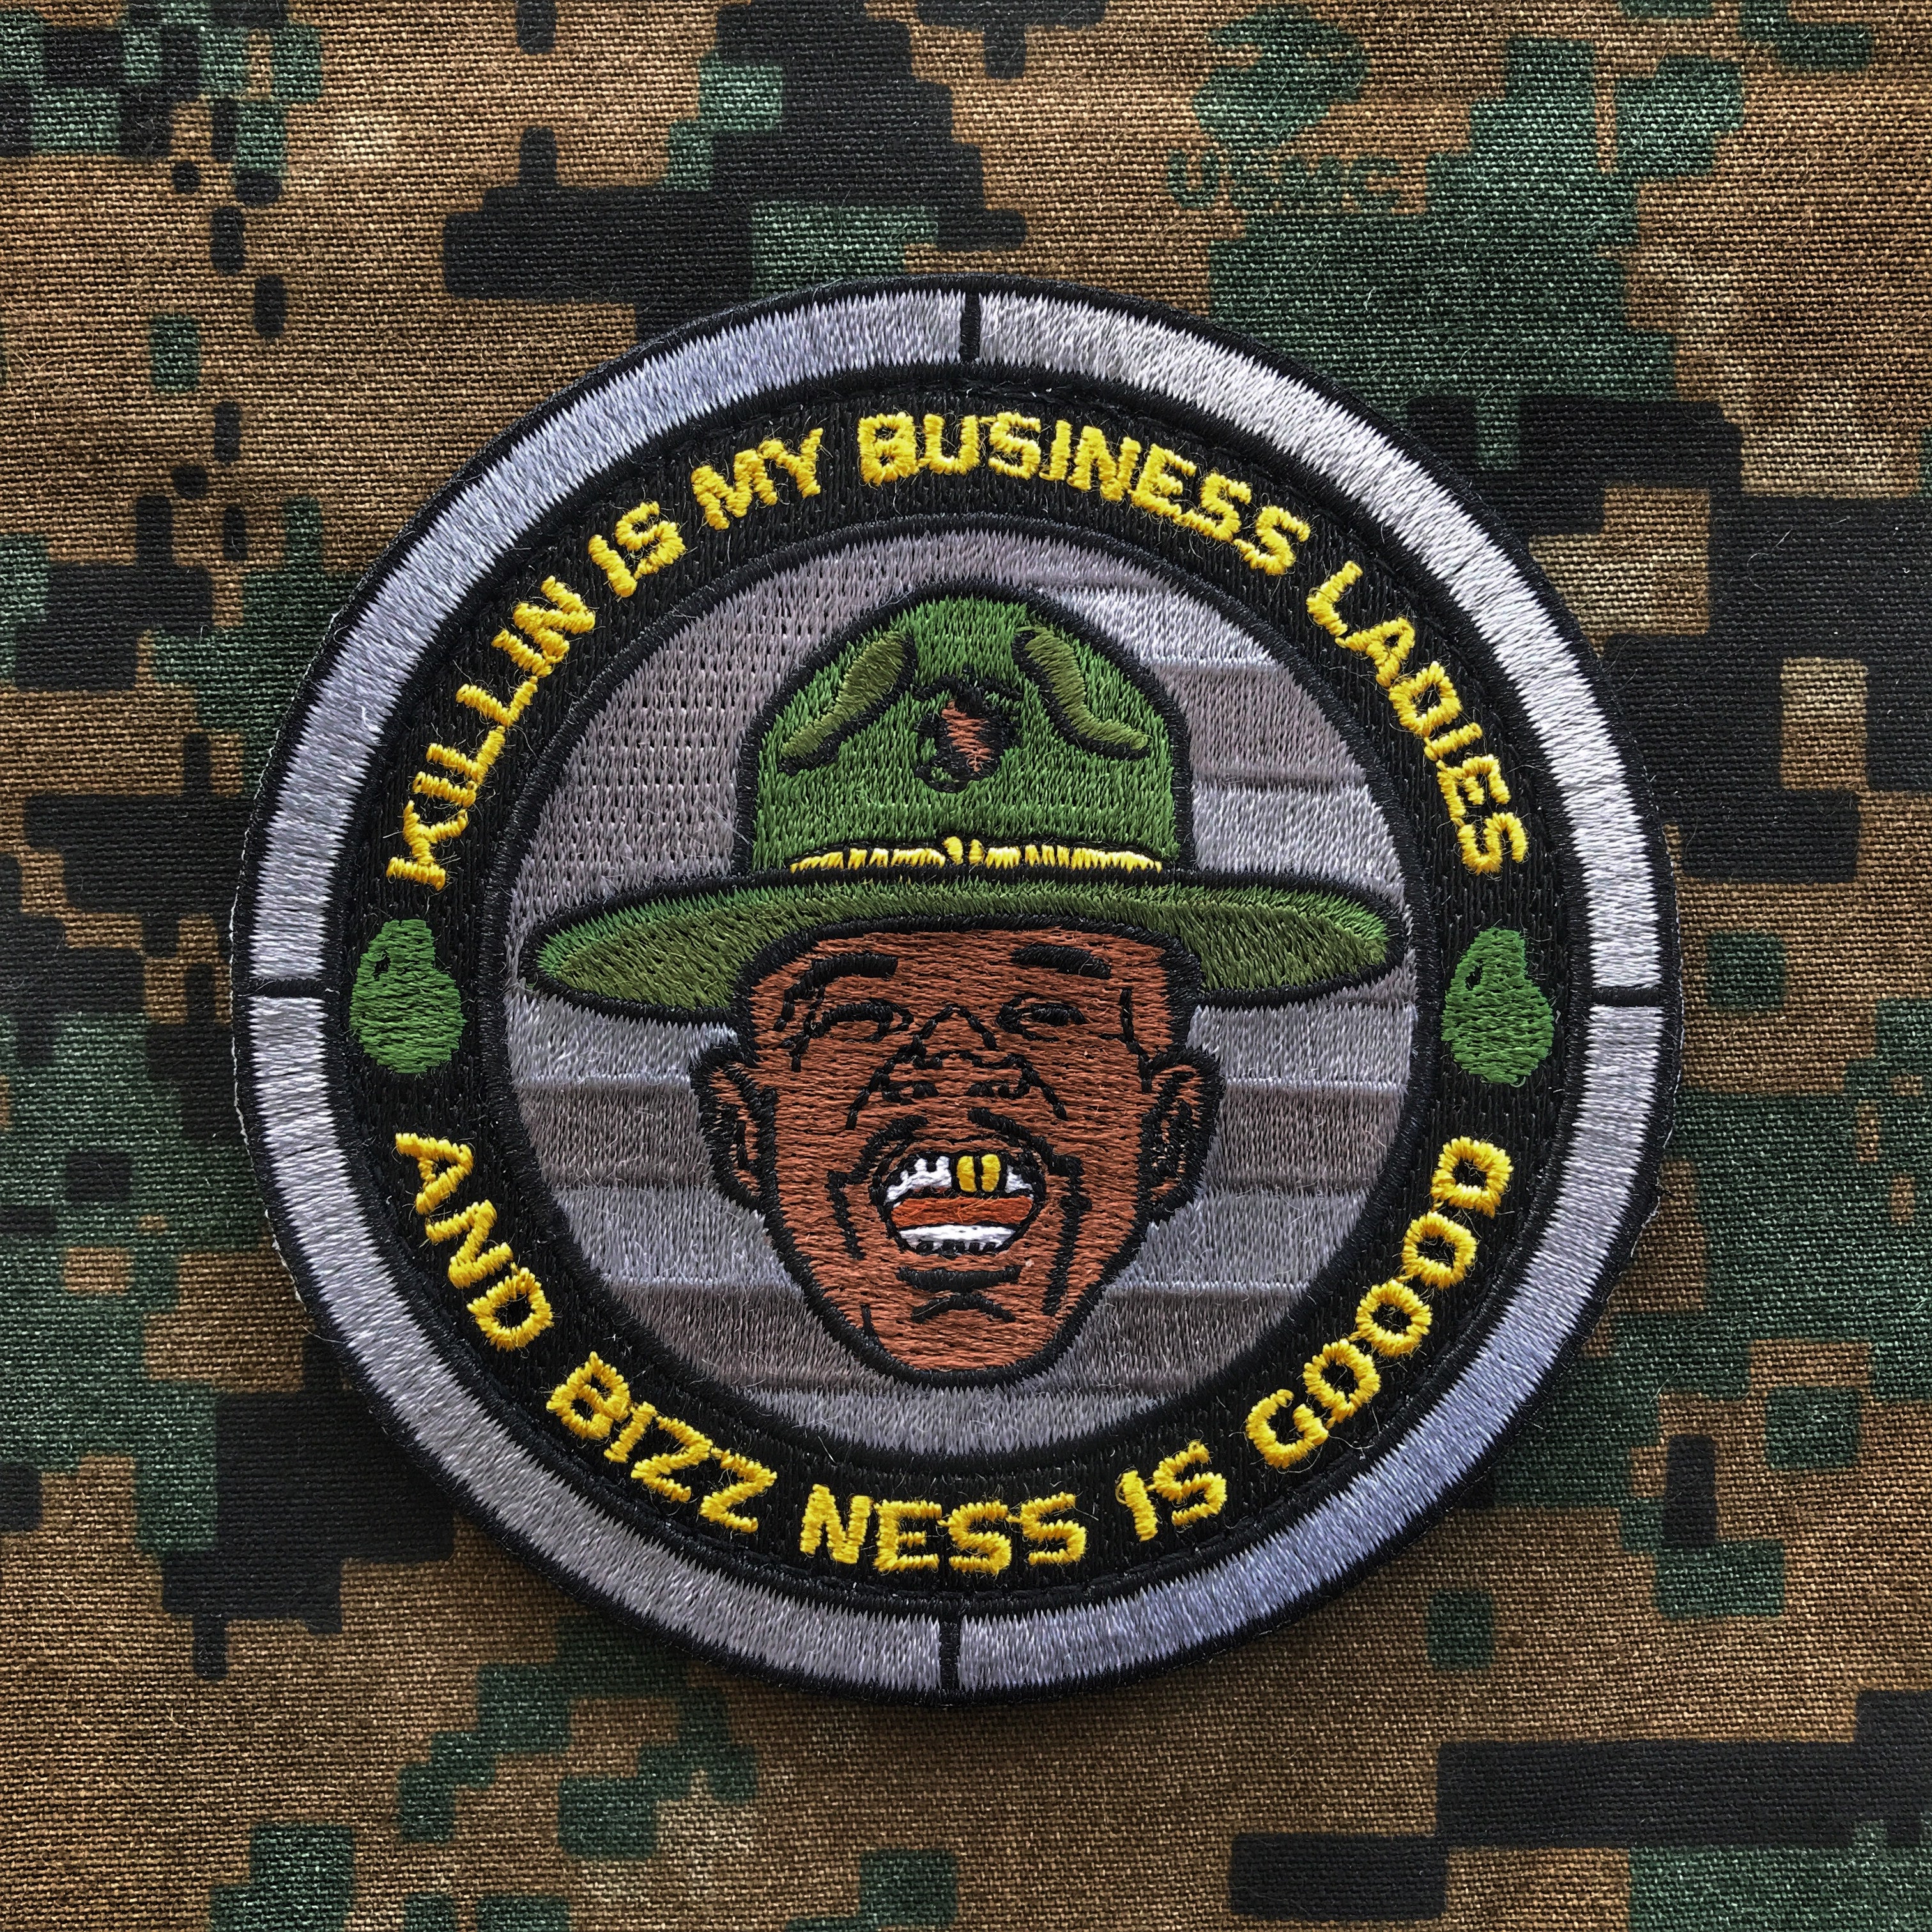 Embroidered round patch depicting a man’s head wearing a drill instructor hat with text that reads Killin is my business ladies and business is good